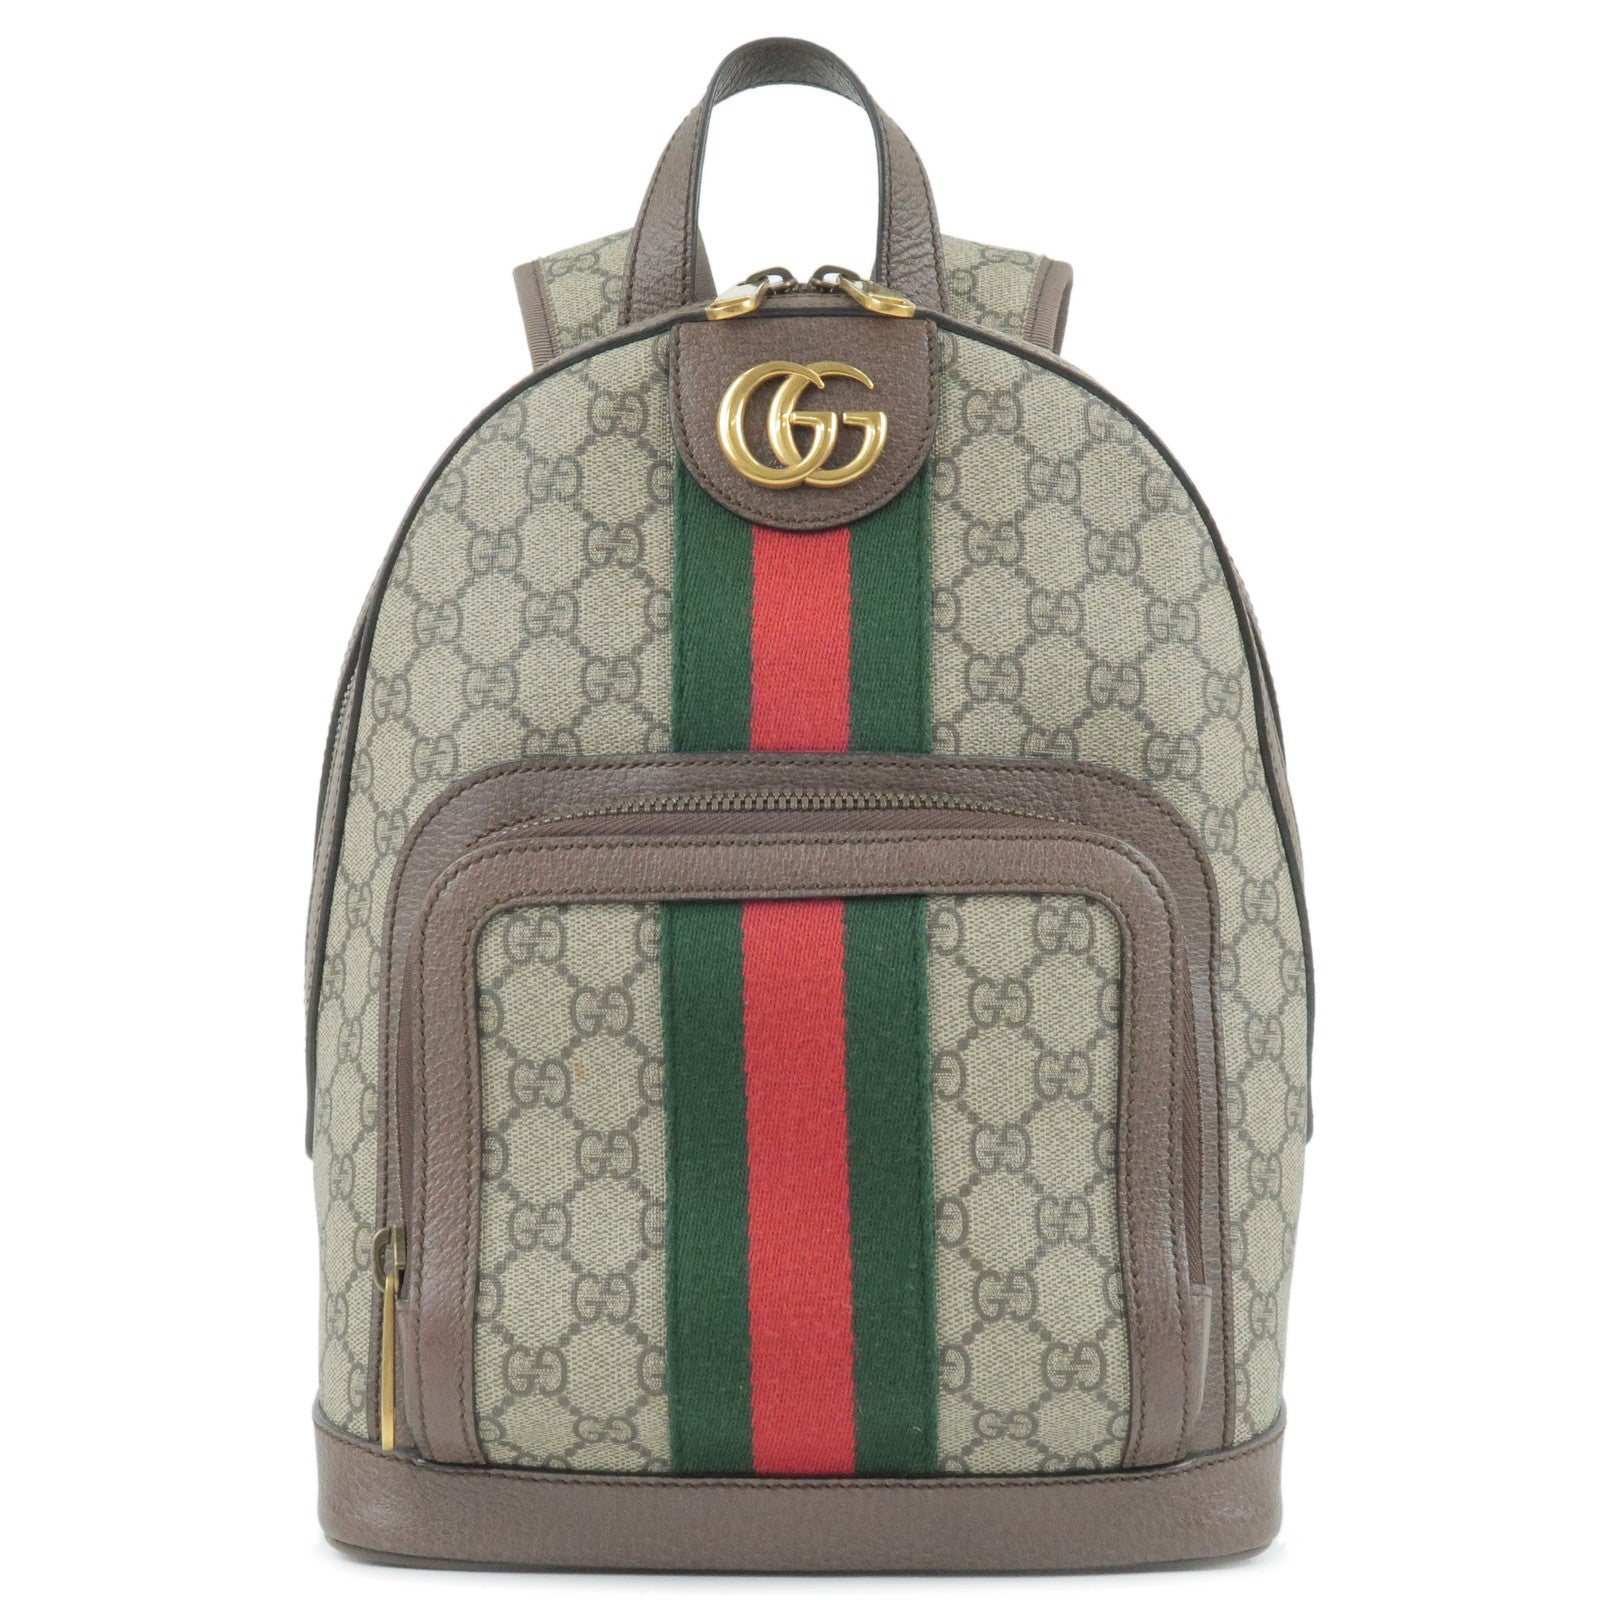 GUCCI-Sherry-Ophidia-GG-Supreme-Leather-GG-Small-Back-Pack-547965